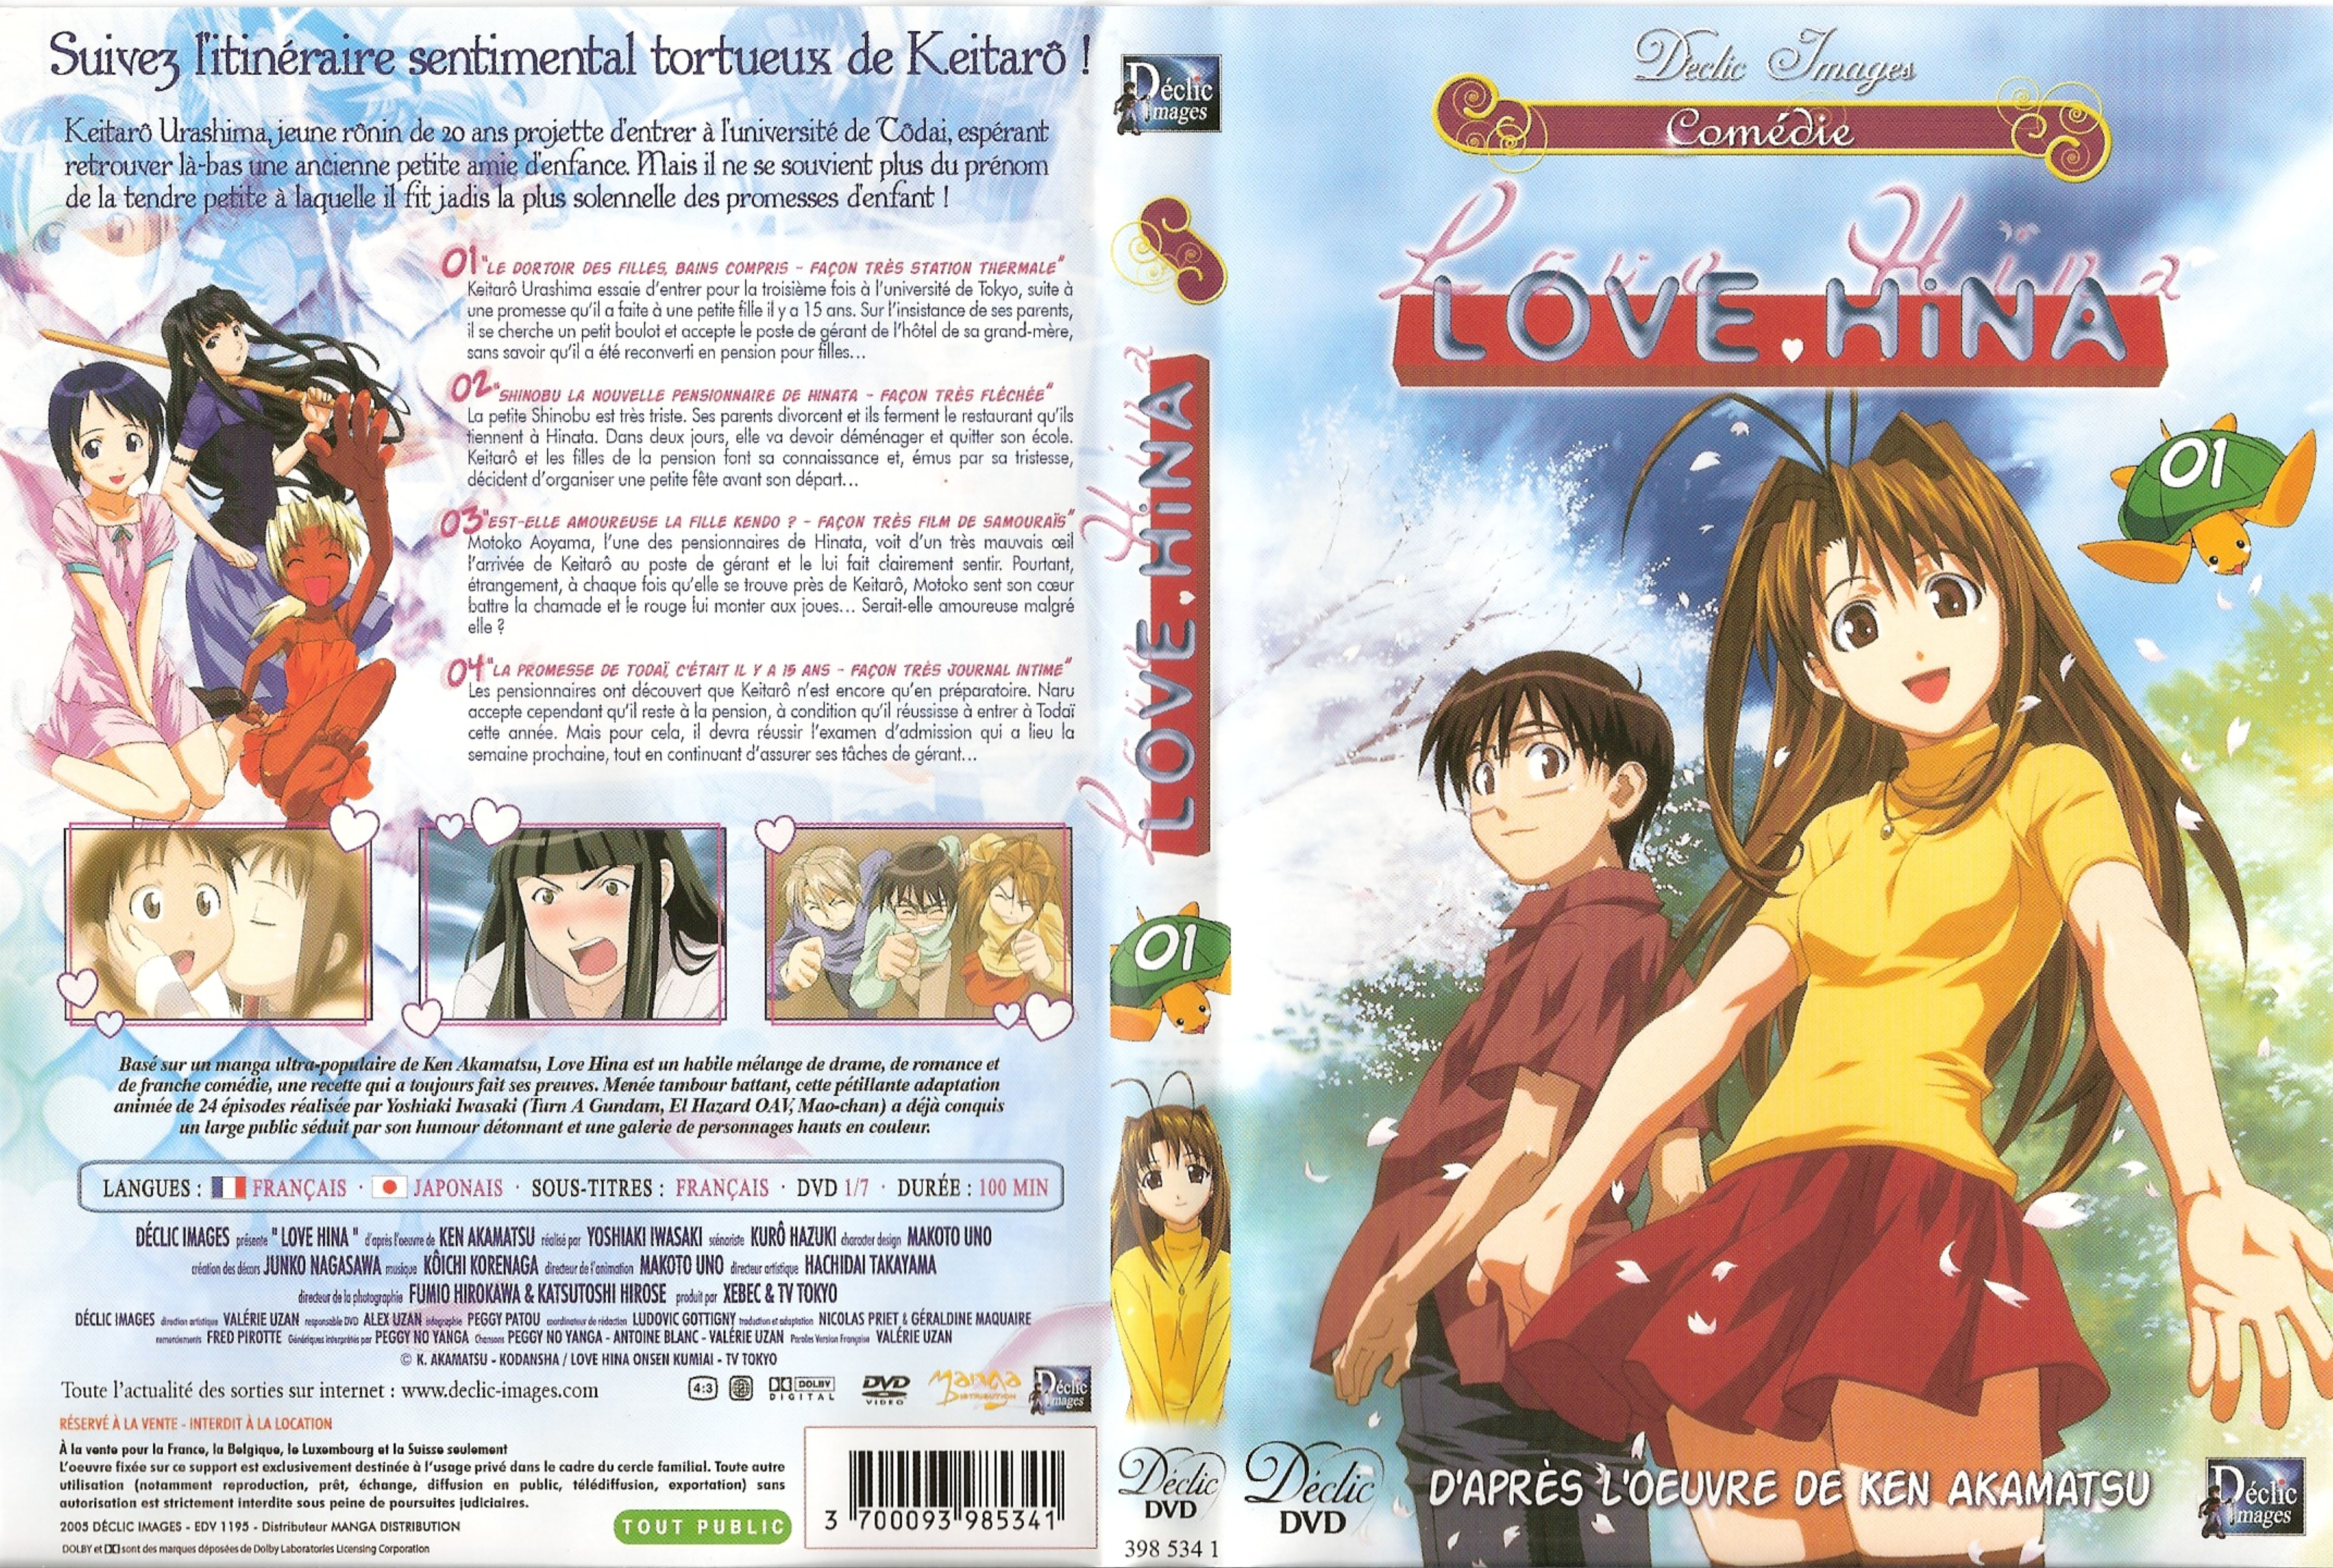 Jaquette DVD Love Hina DVD 01